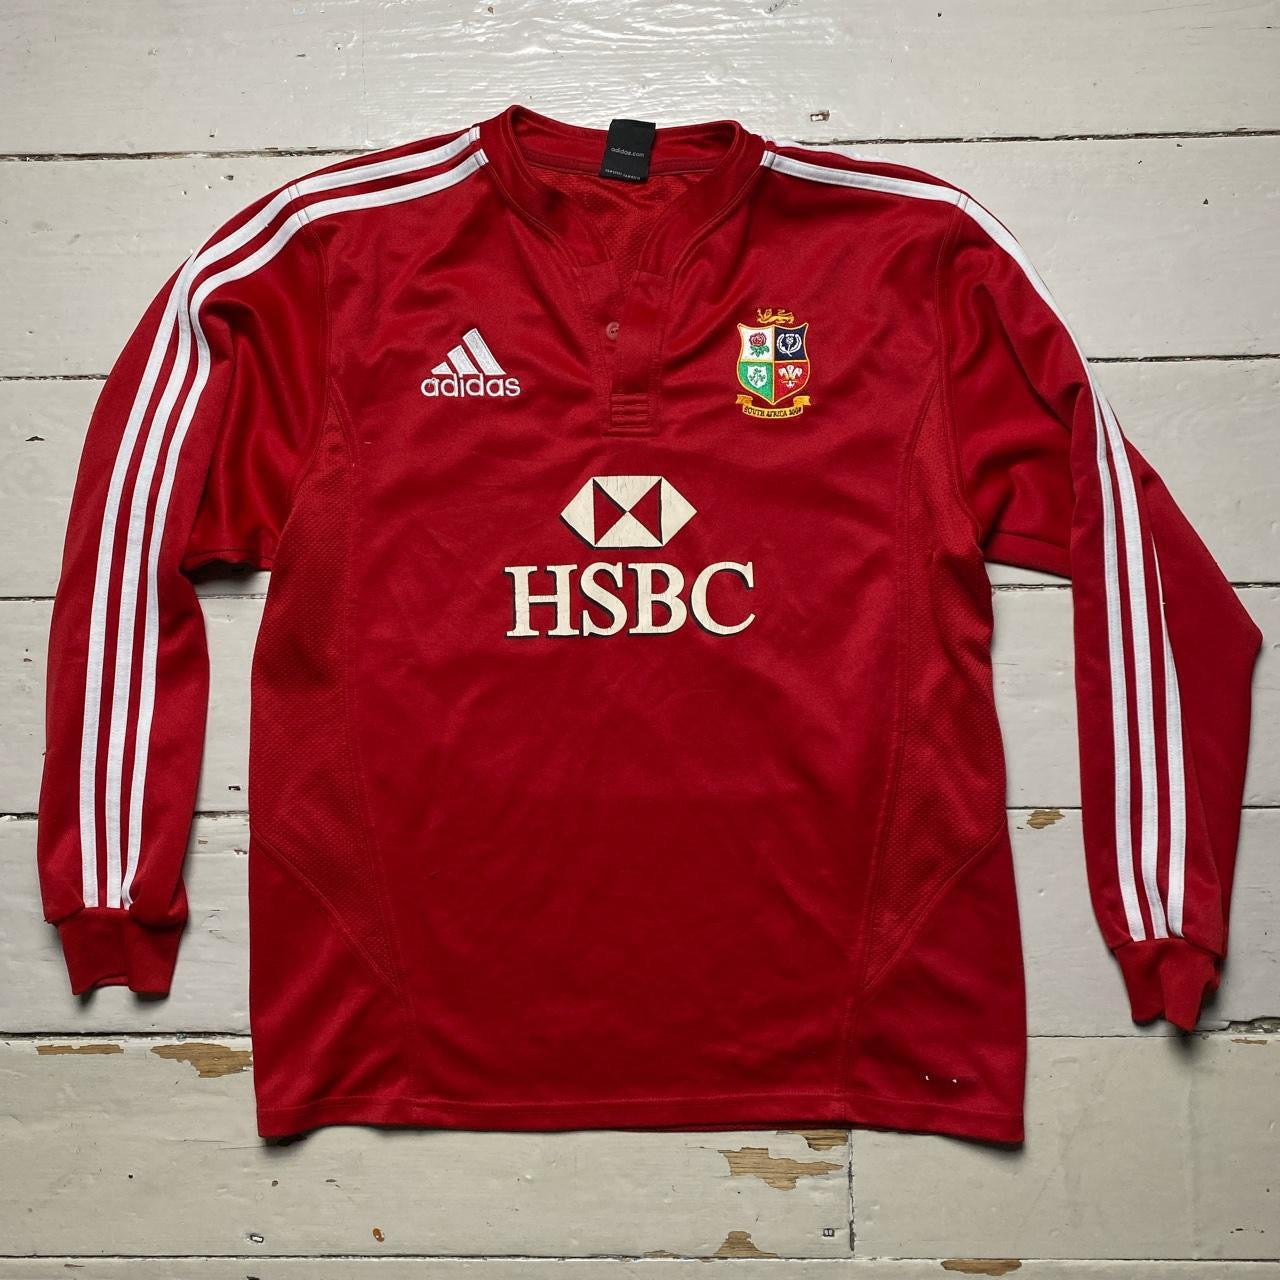 British Lions South Africa Rugby Jersey (Large)